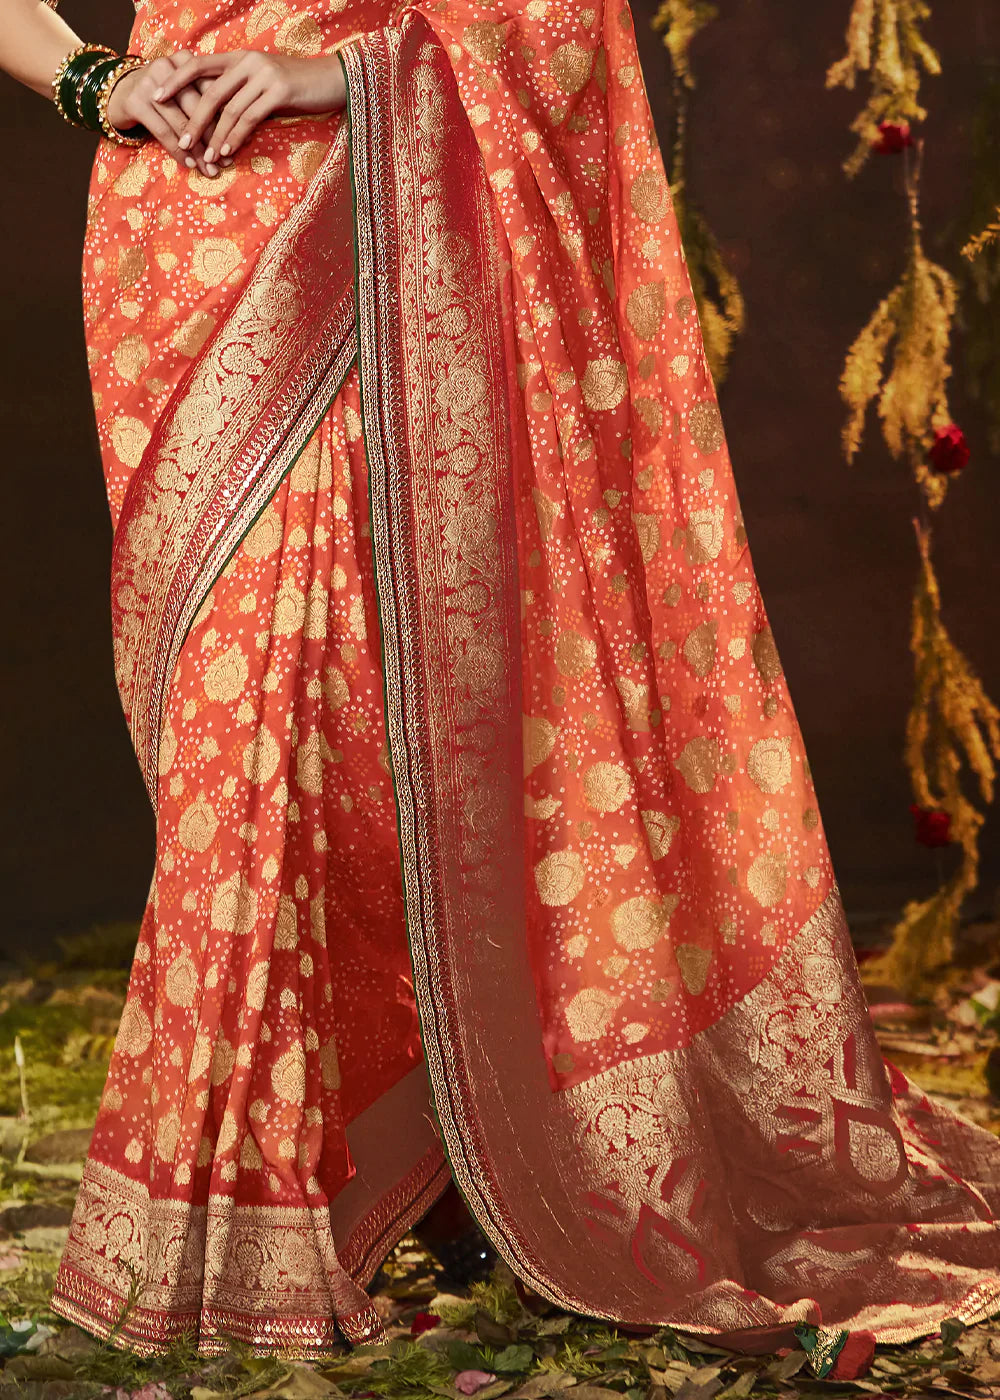 Imperial Red Zari Weaving Georgette Silk Saree with Embroidery Designer Blouse